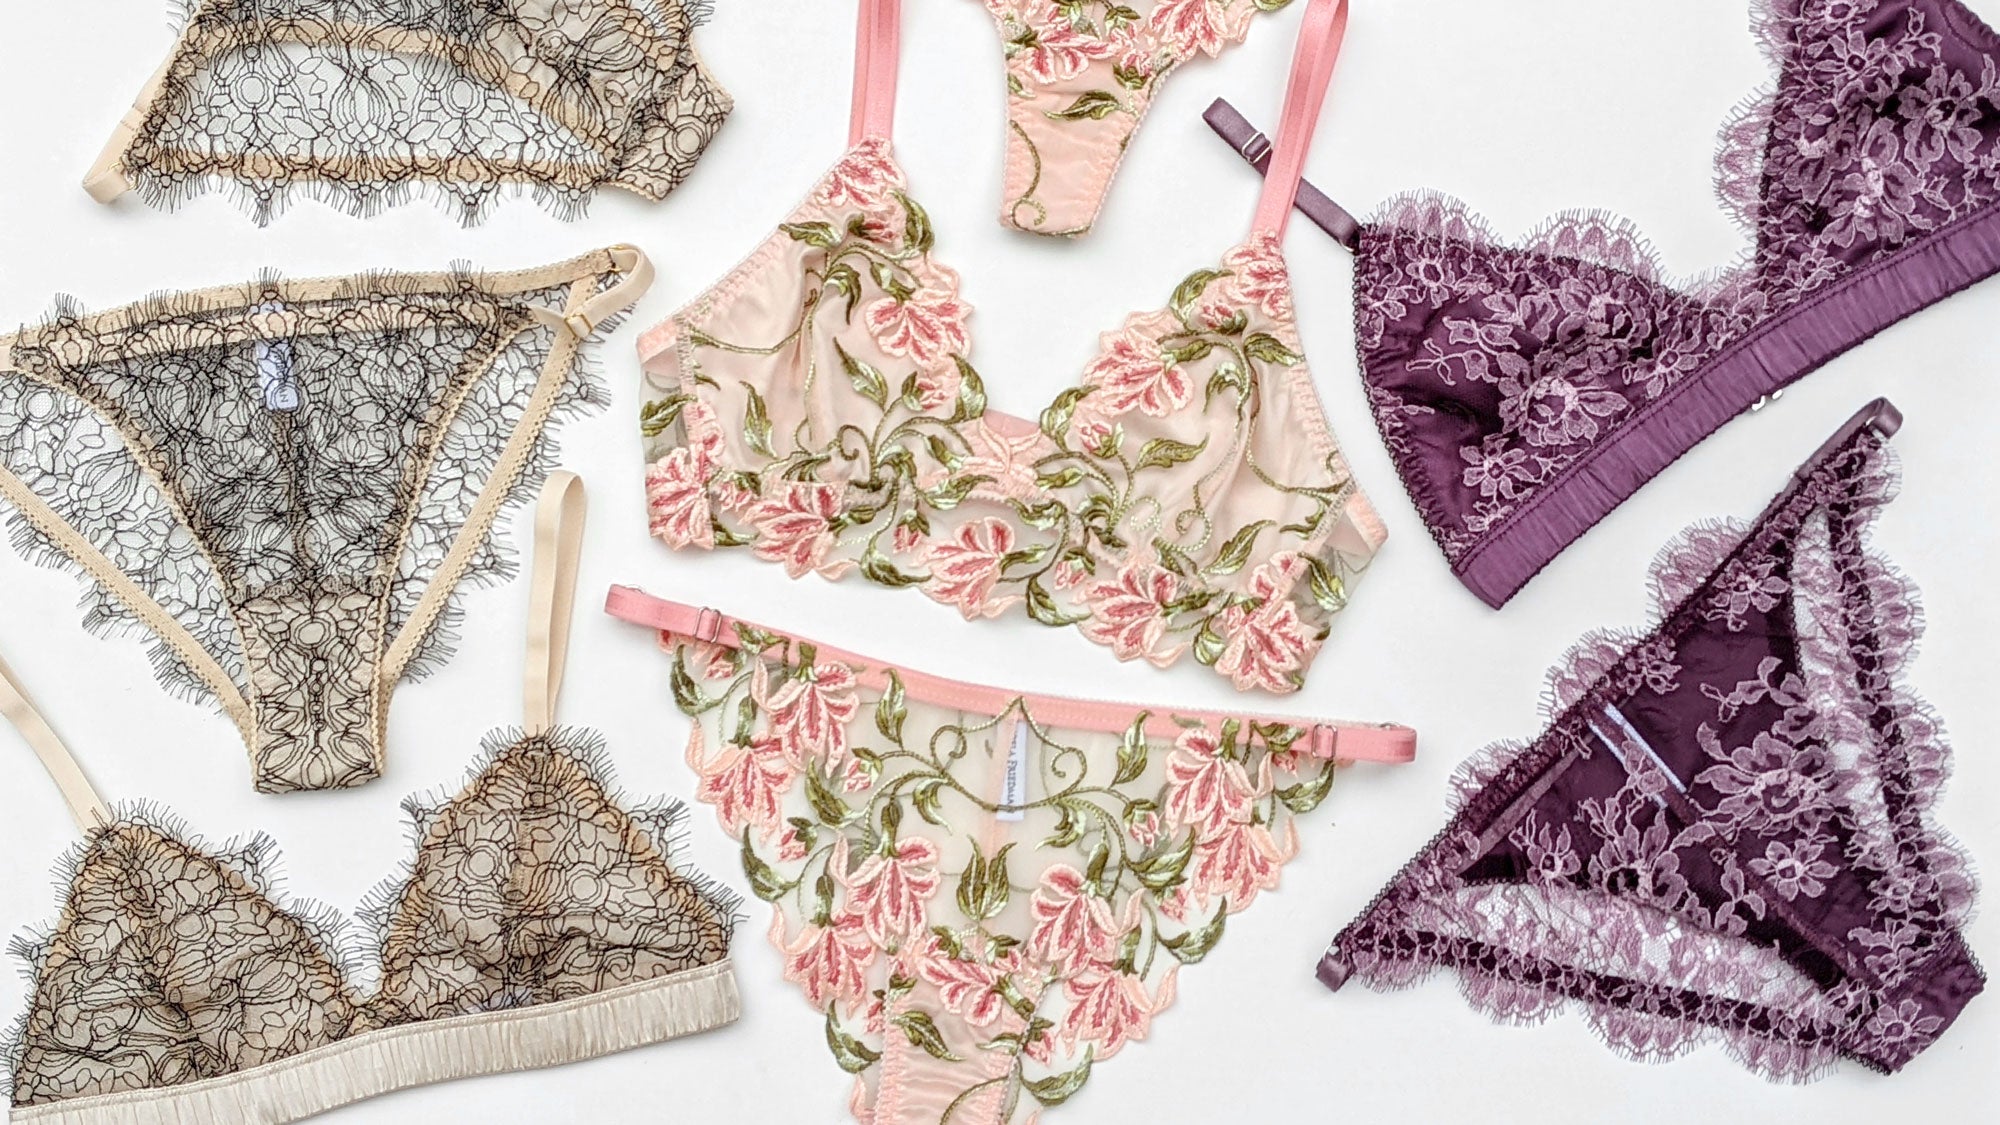 Tezenis launched new underwear collection made from recycled lace